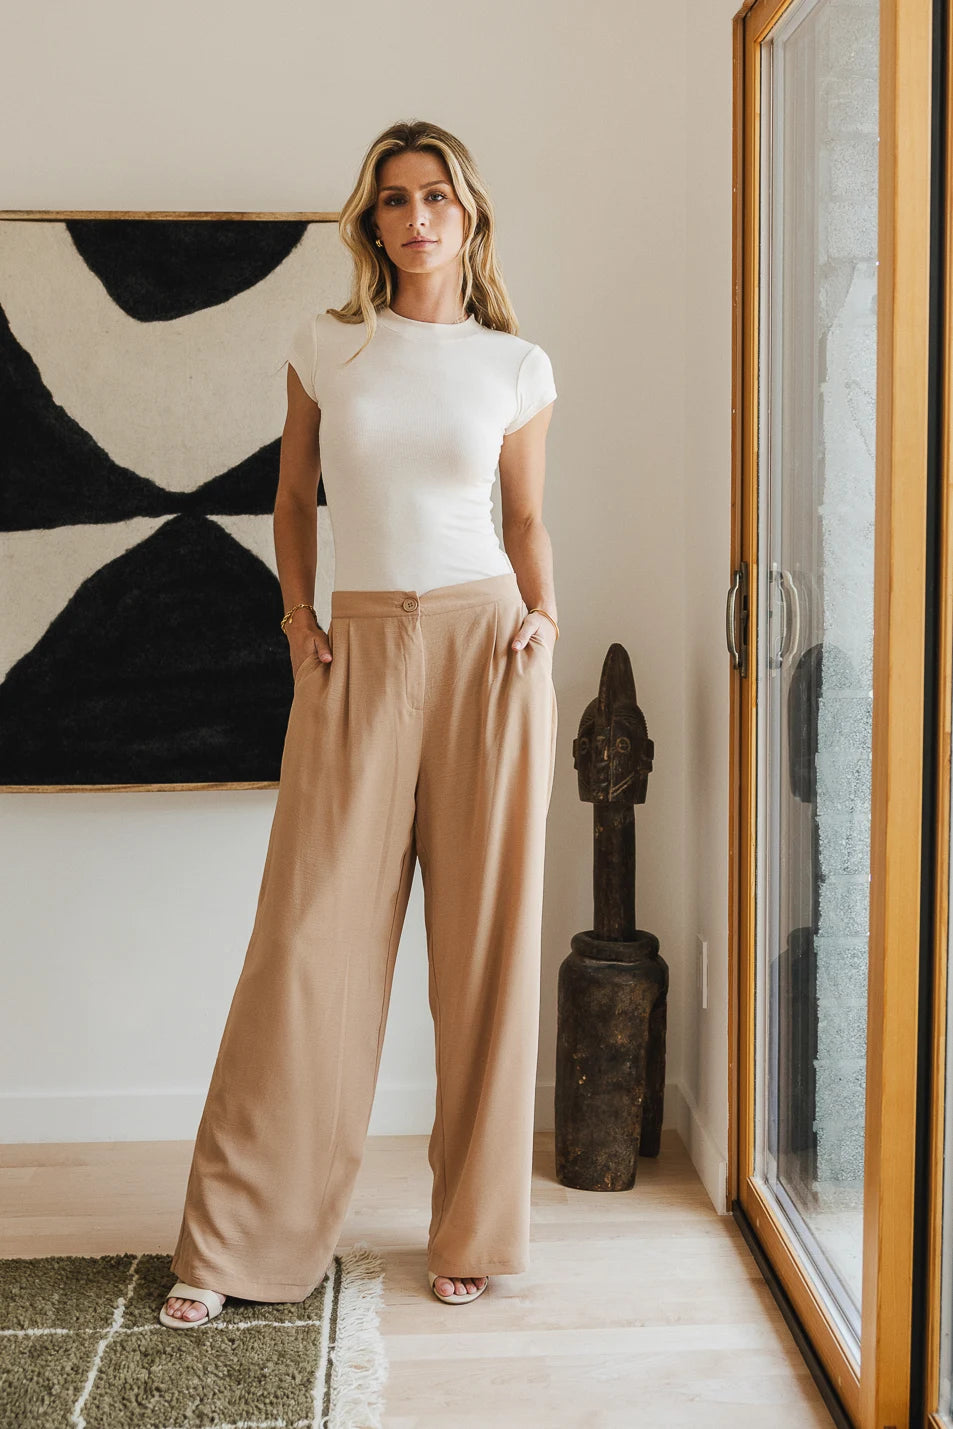 New in. Wide leg pants. | Wide leg pants outfit, Brown wide leg pants outfit,  Spring outfits casual